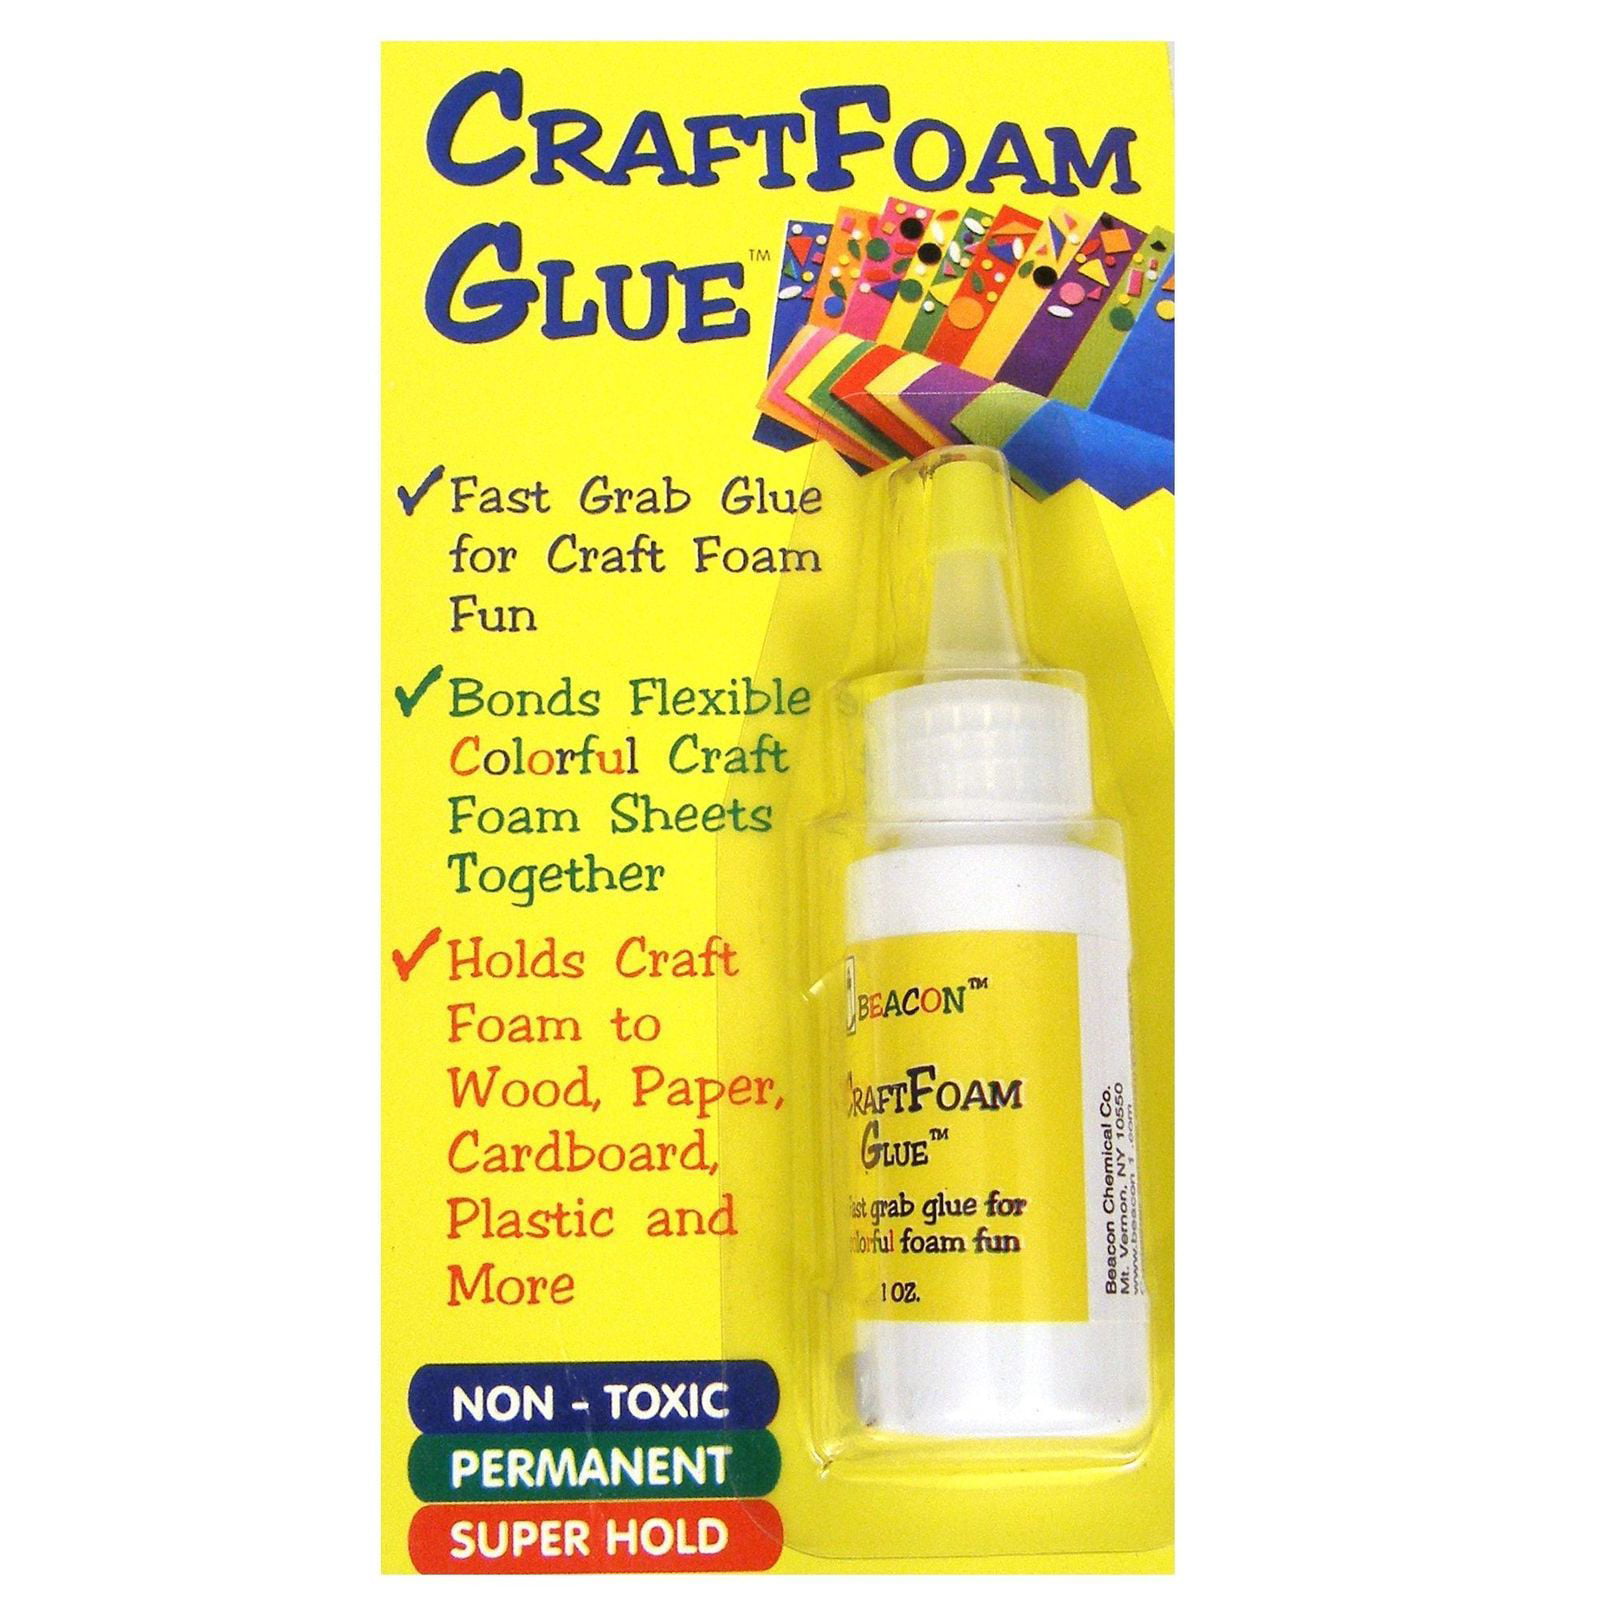  BEACON Felt Glue - Fast Fix for All Felt Projects, Non-Toxic,  Dries Clear, Great for Kids, Washer-Friendly, 4-Ounce